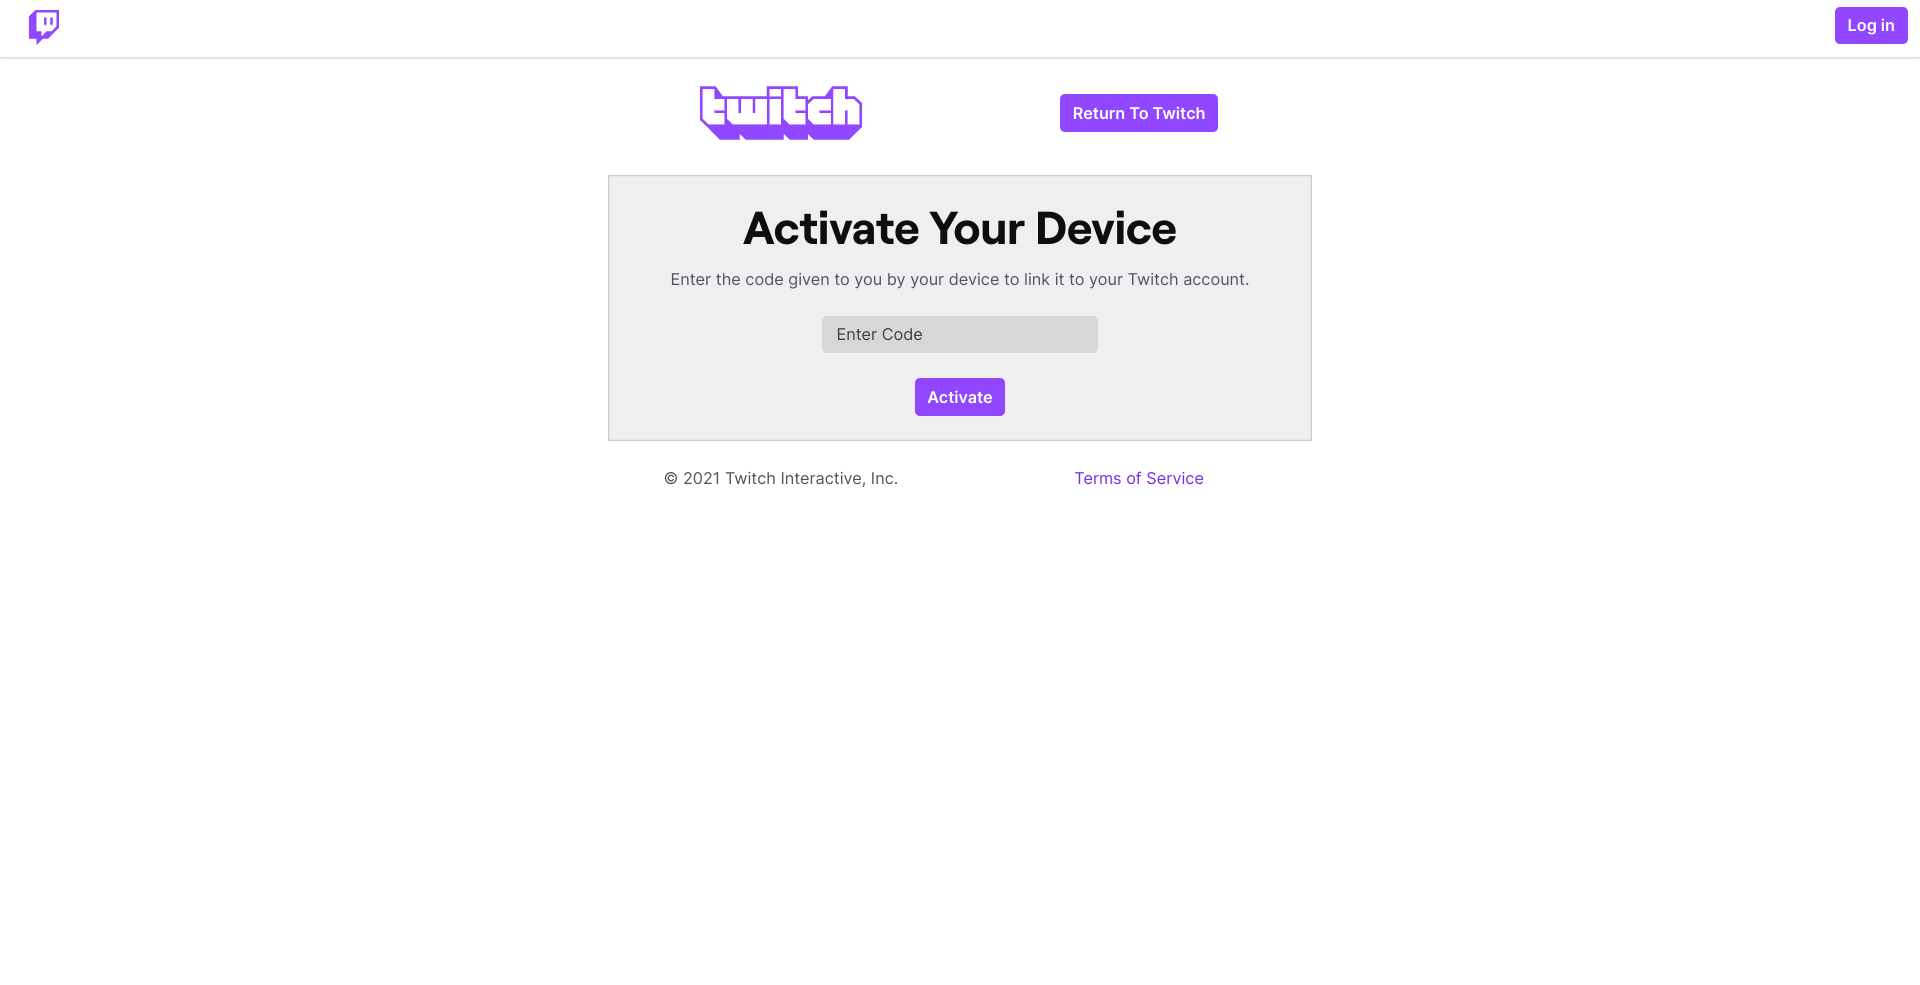 twitch.tv/activate – Activate Your Device